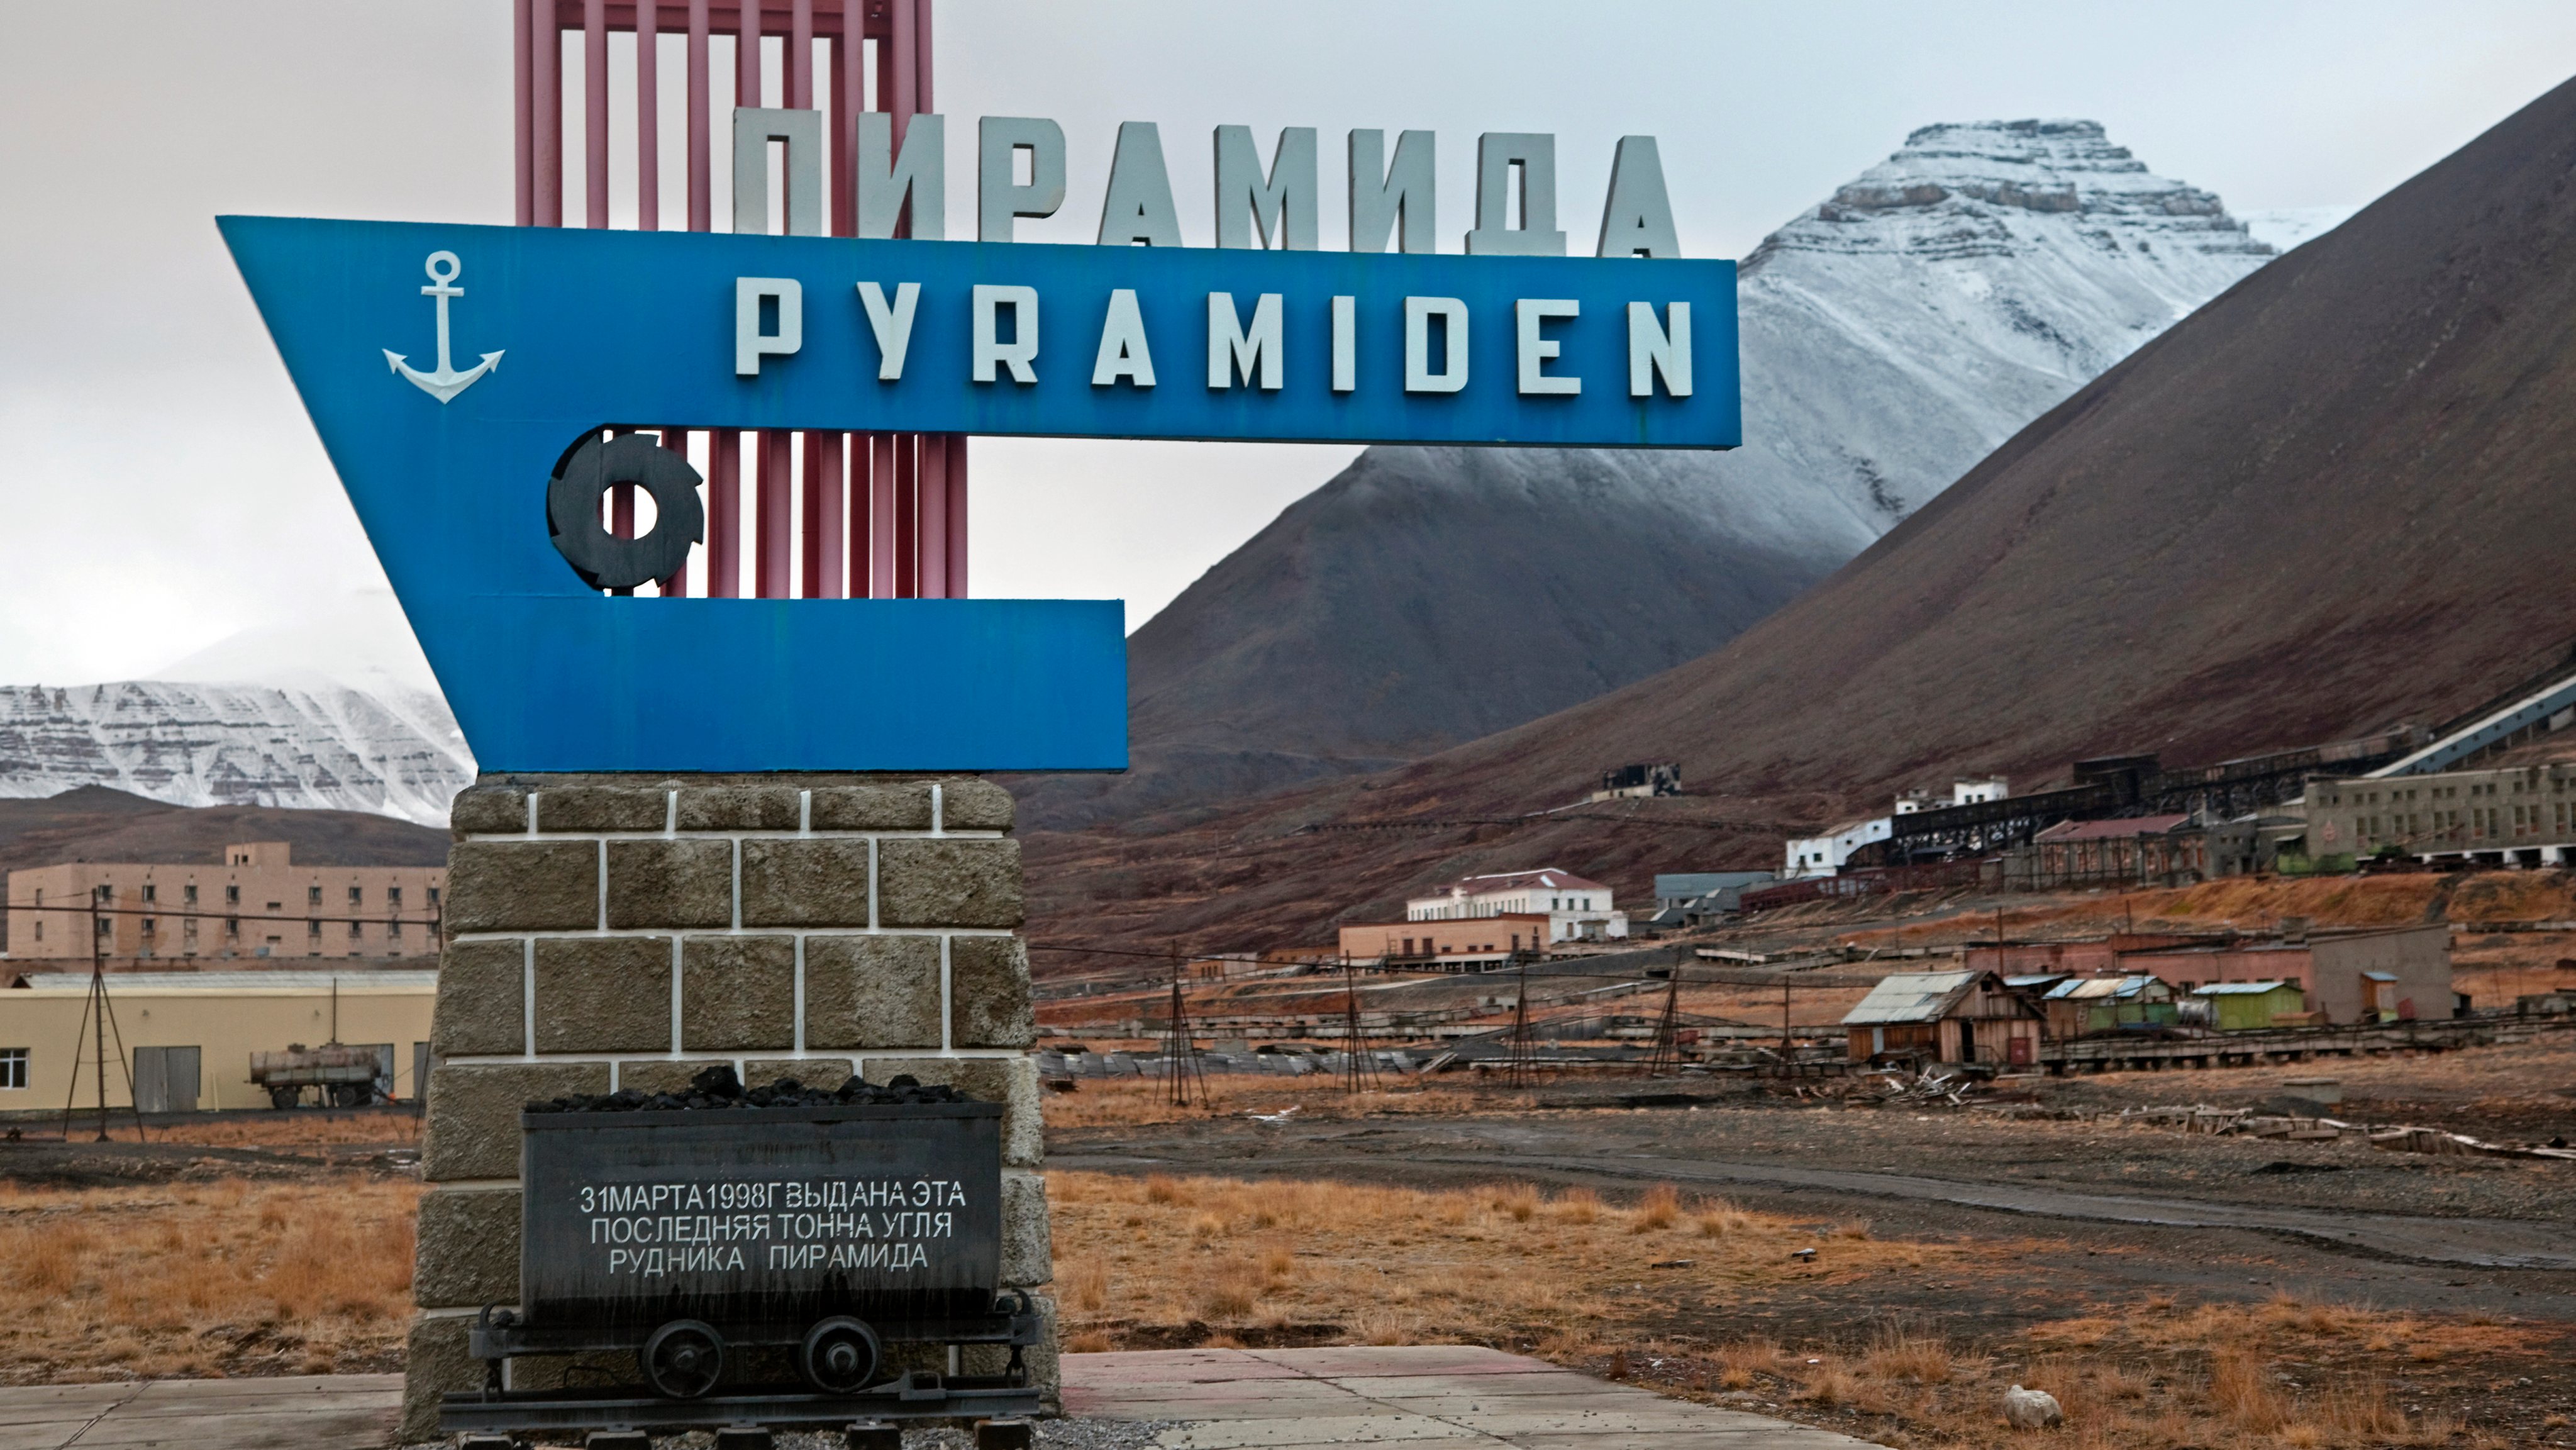 Pyramiden, abandoned Russian settlement and coal mining community on Spitsbergen, Svalbard, Norway